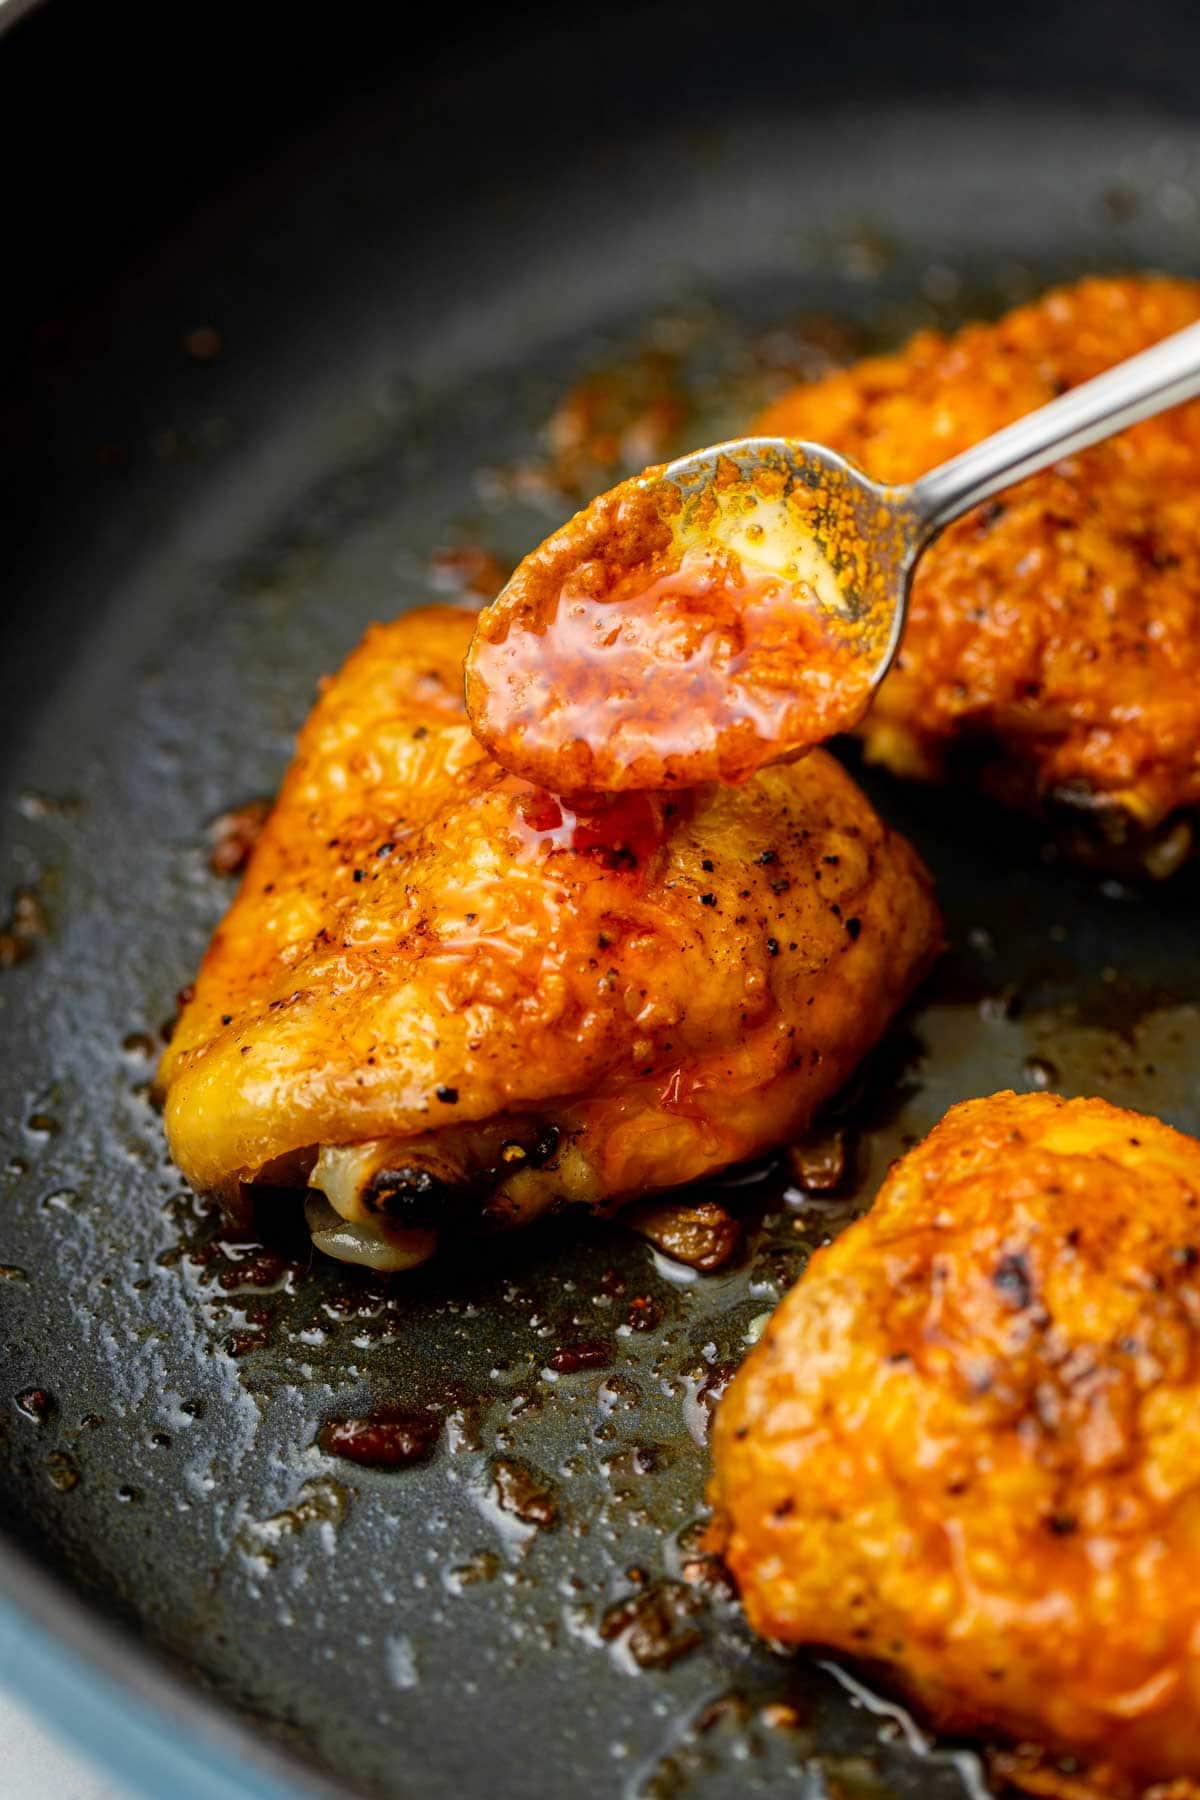 Spooning buffalo sauce over a pan-fried chicken thigh.